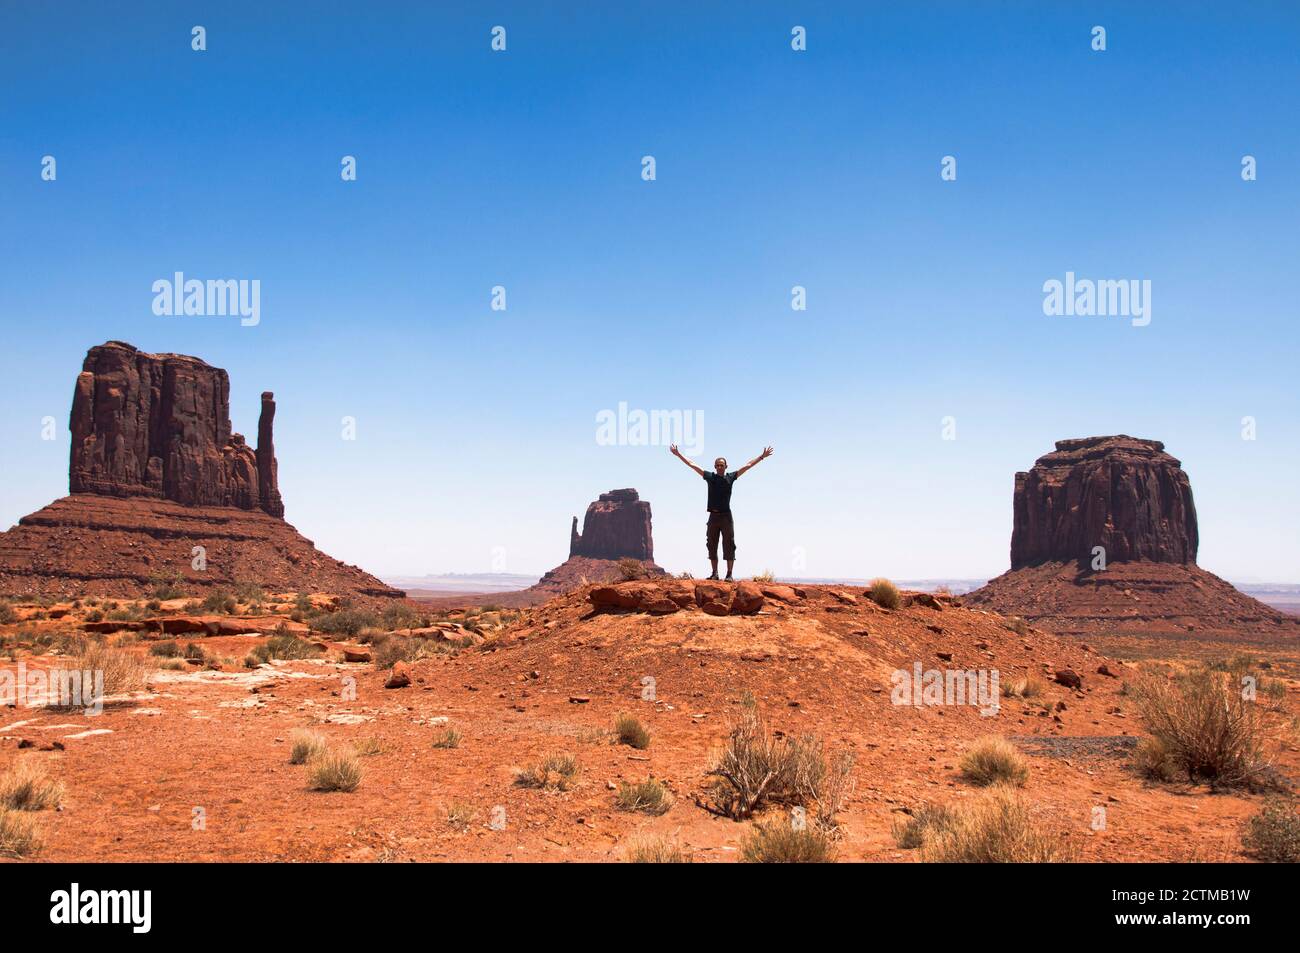 Some of the famous sandstone buttes located in Monument Valley, a region of the Colorado Plateau in Utah, United States. A young man with open arms in Stock Photo